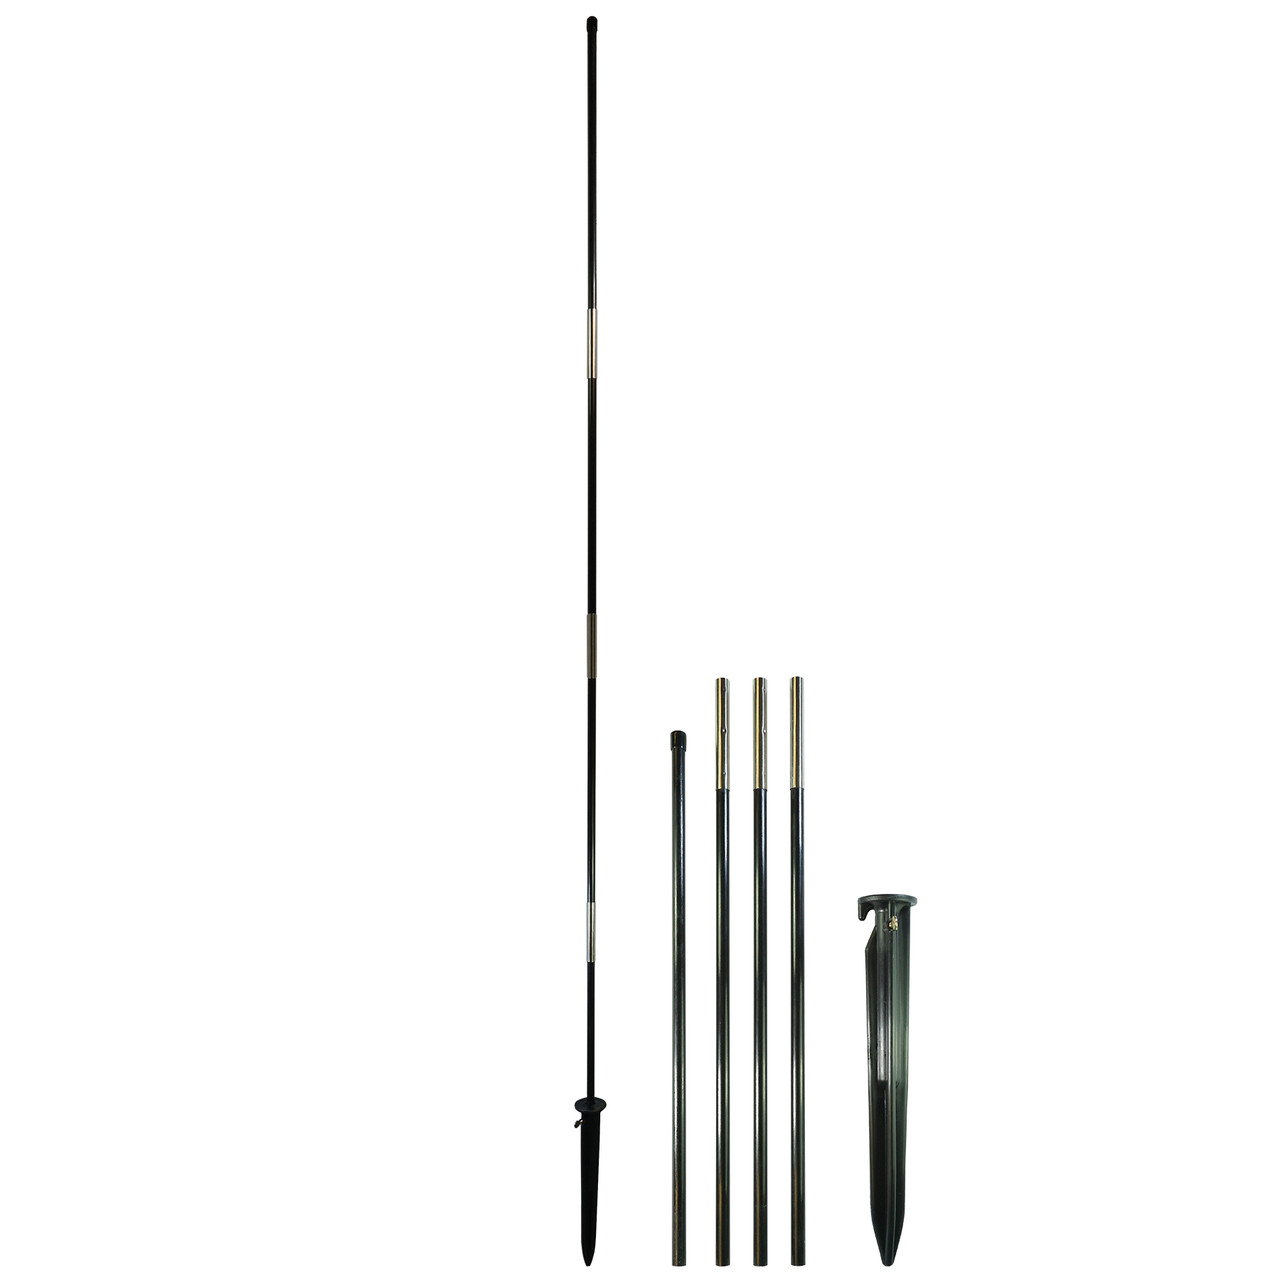 in The Breeze 4549 6-Foot, 4-Section Freestanding Banner Pole with Ground Stake Flagpole for Feather Banners 0.5 inch Diameter Banner Pole for